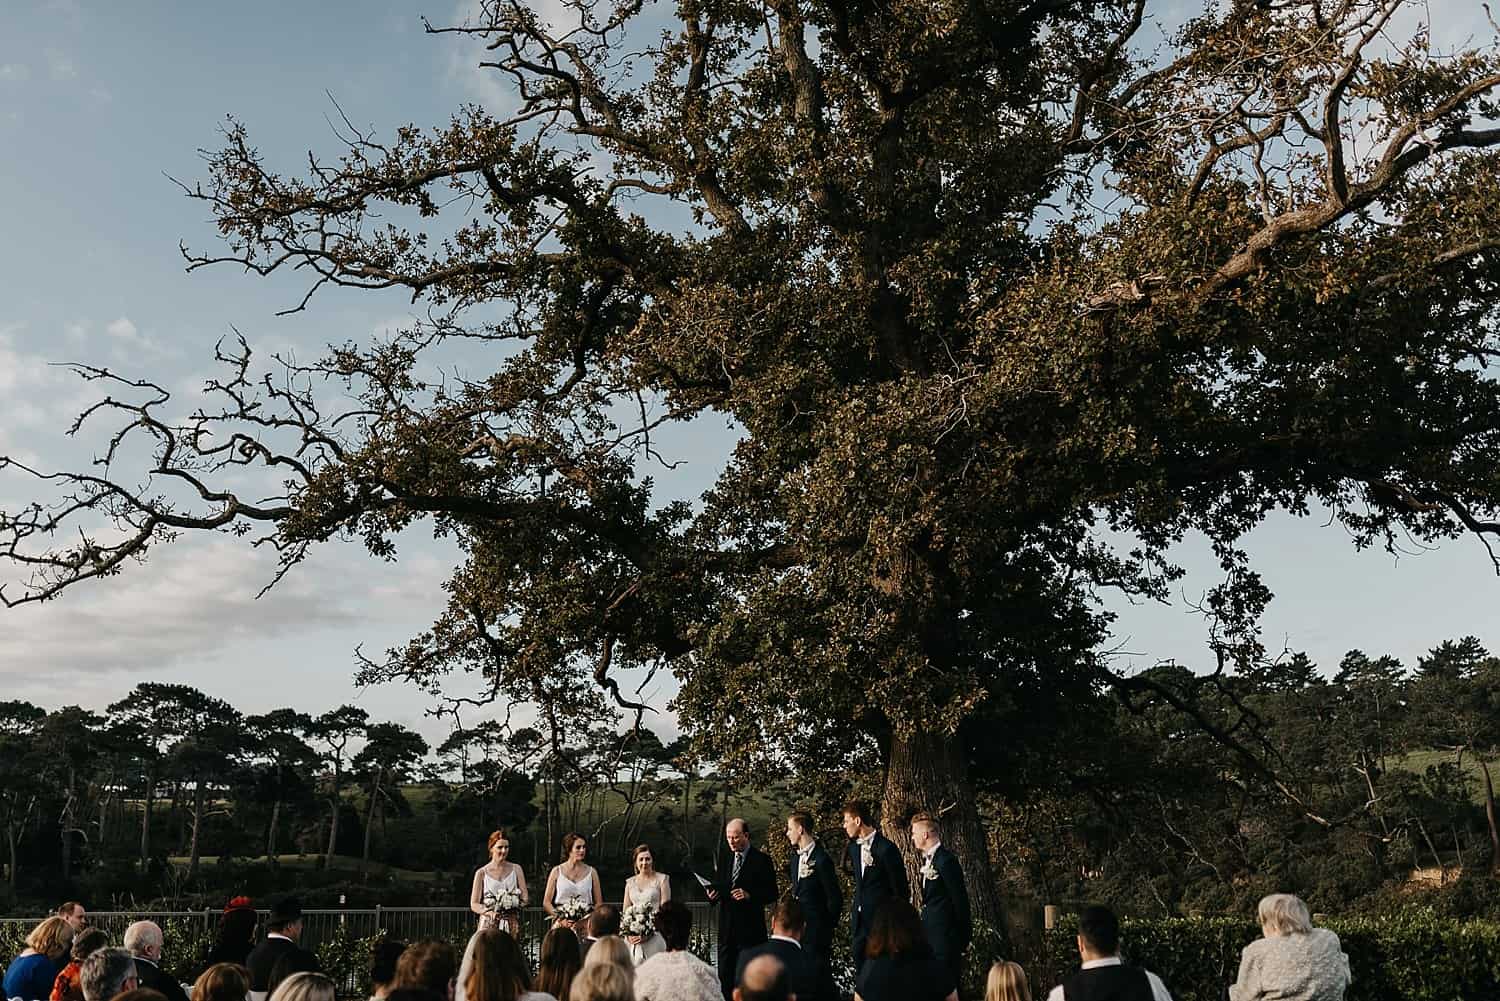 Riverhead Boat House Wedding Photography Auckland